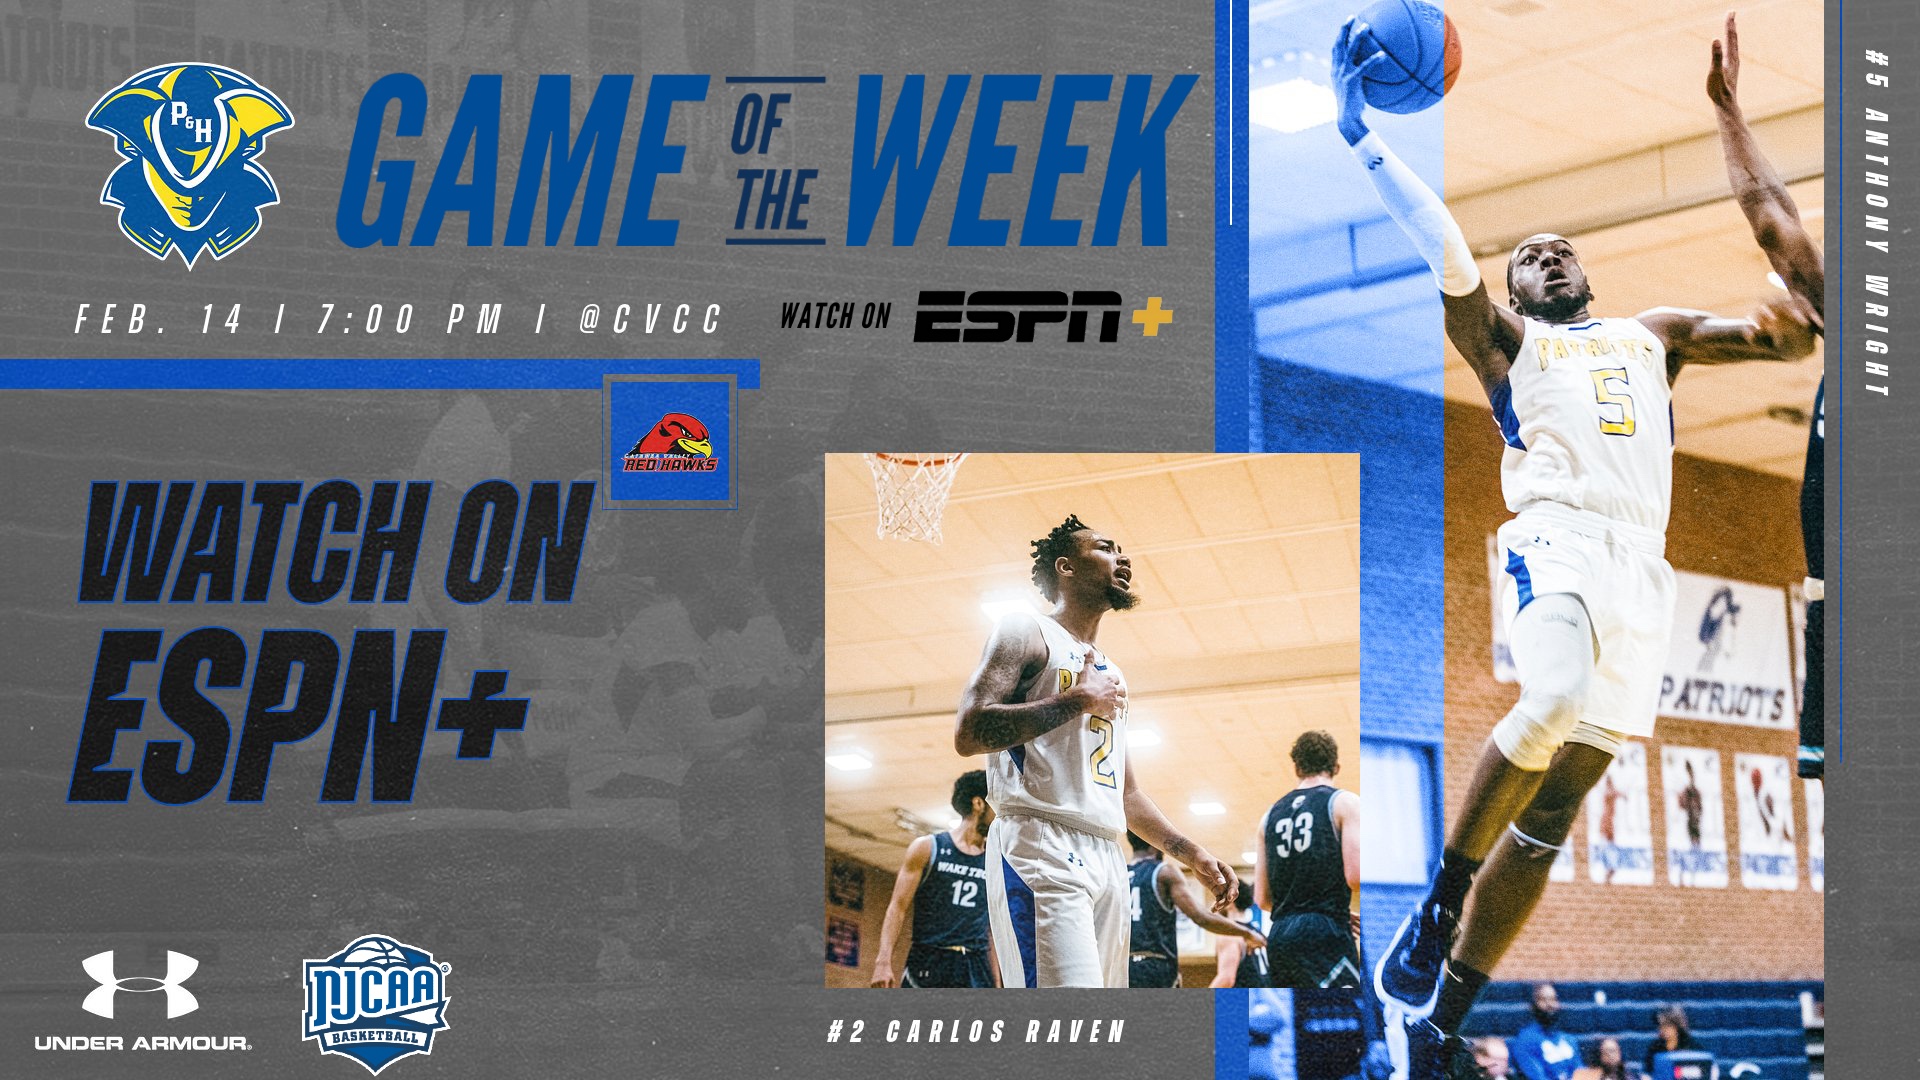 Patriots to be Featured on ESPN+ as NJCAA Game of the Week on February 14